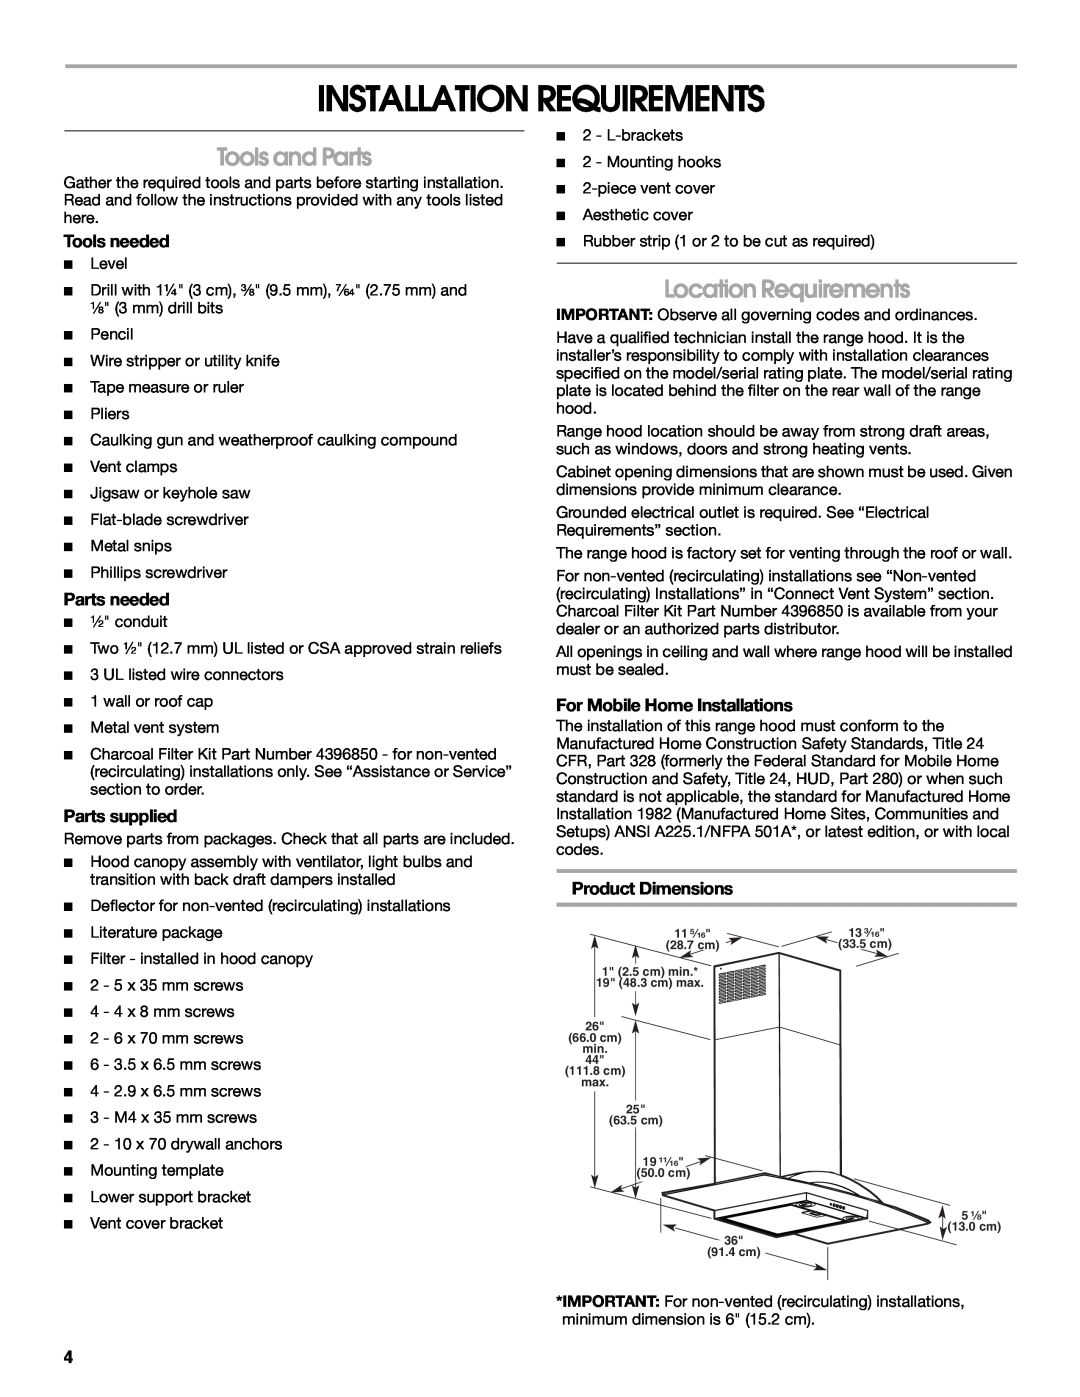 Whirlpool W10018010 Installation Requirements, Tools and Parts, Location Requirements, Tools needed, Parts needed 